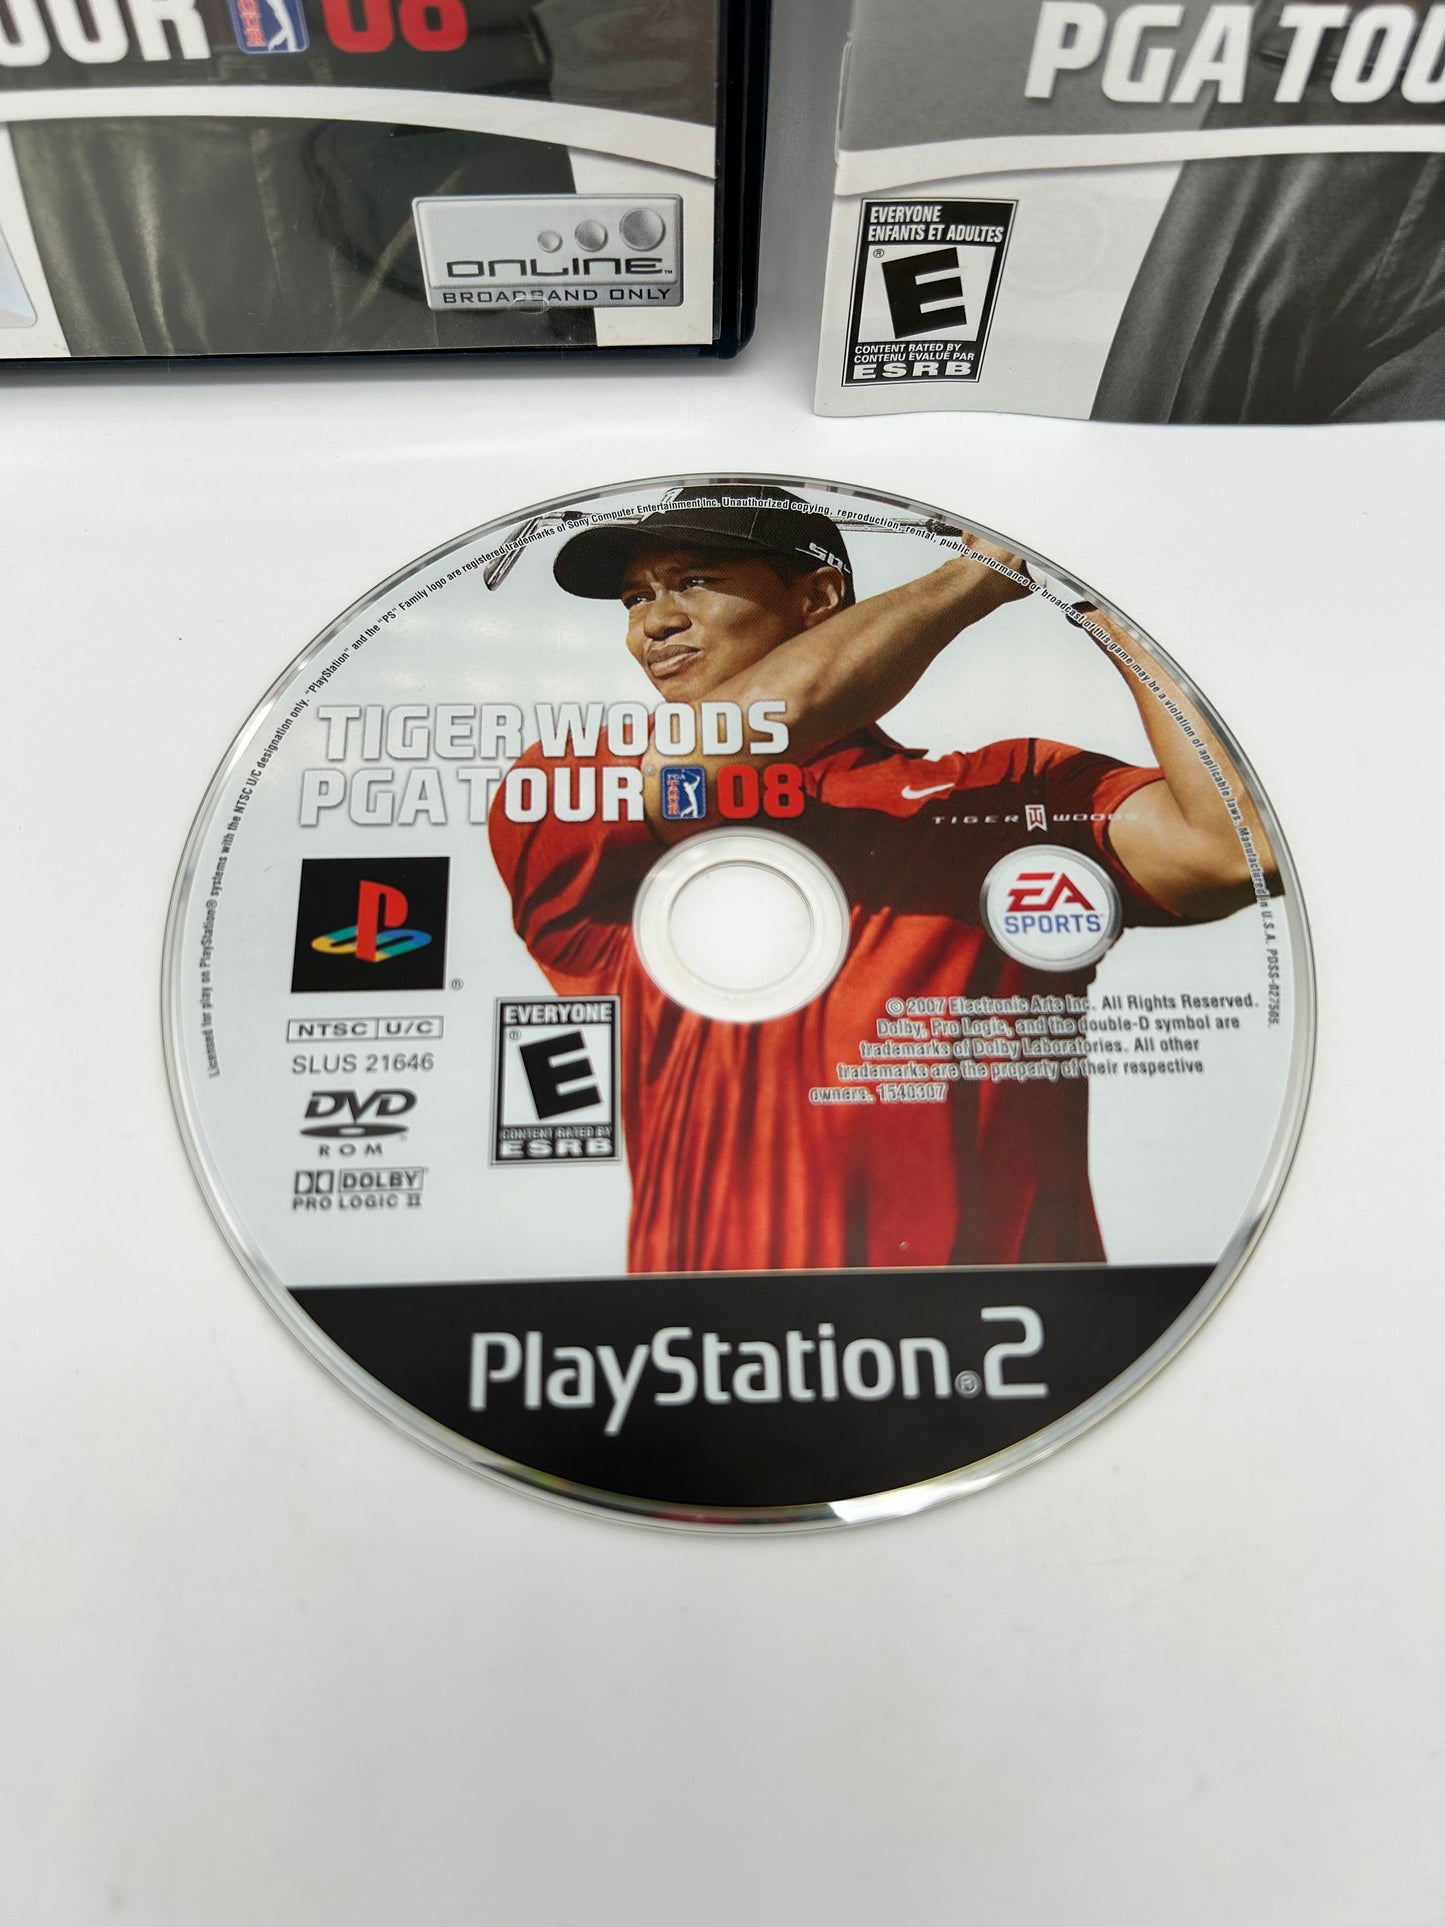 SONY PLAYSTATiON 2 [PS2] | Tiger Woods PGA TOUR 08